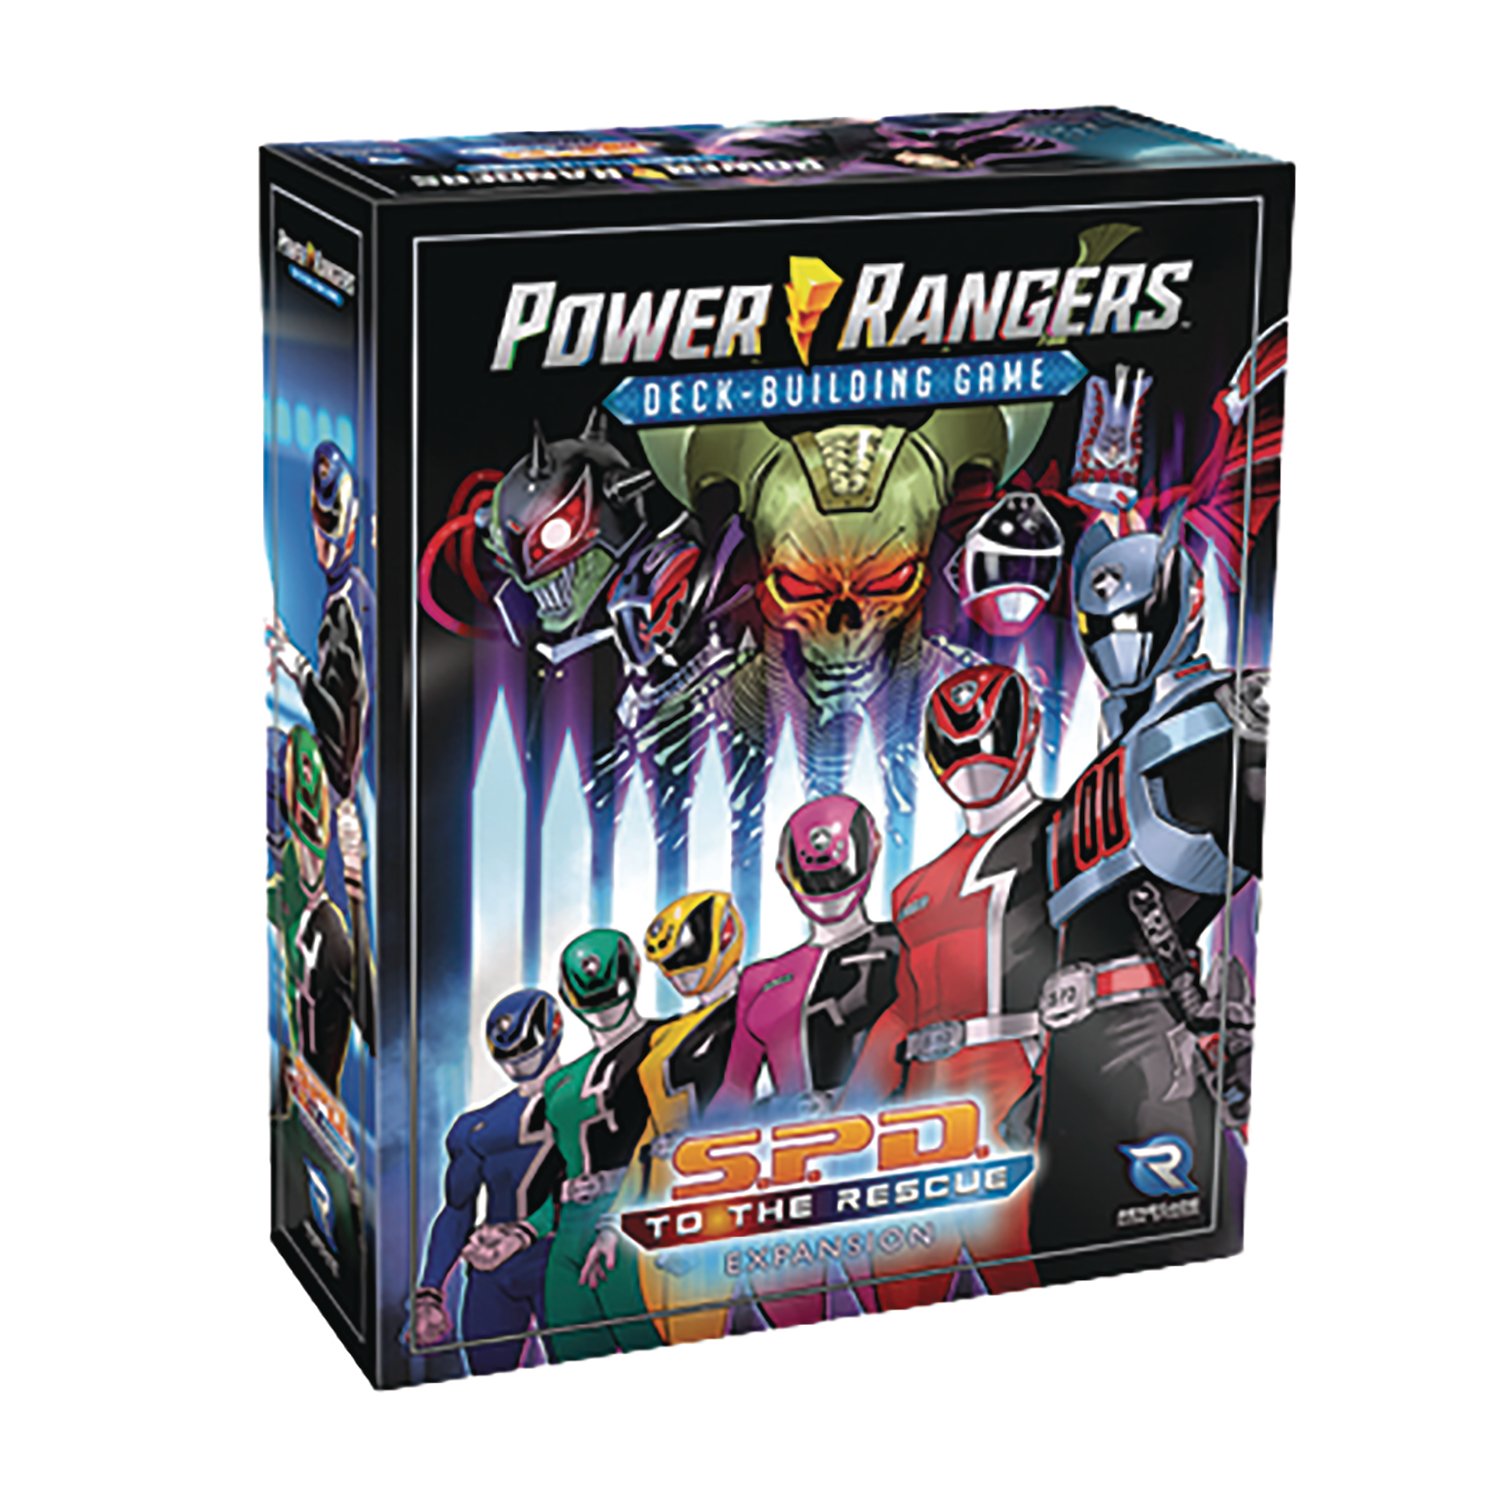 Power Rangers Deck Building Game: Space Patrol Delta To The Rescue Expansion